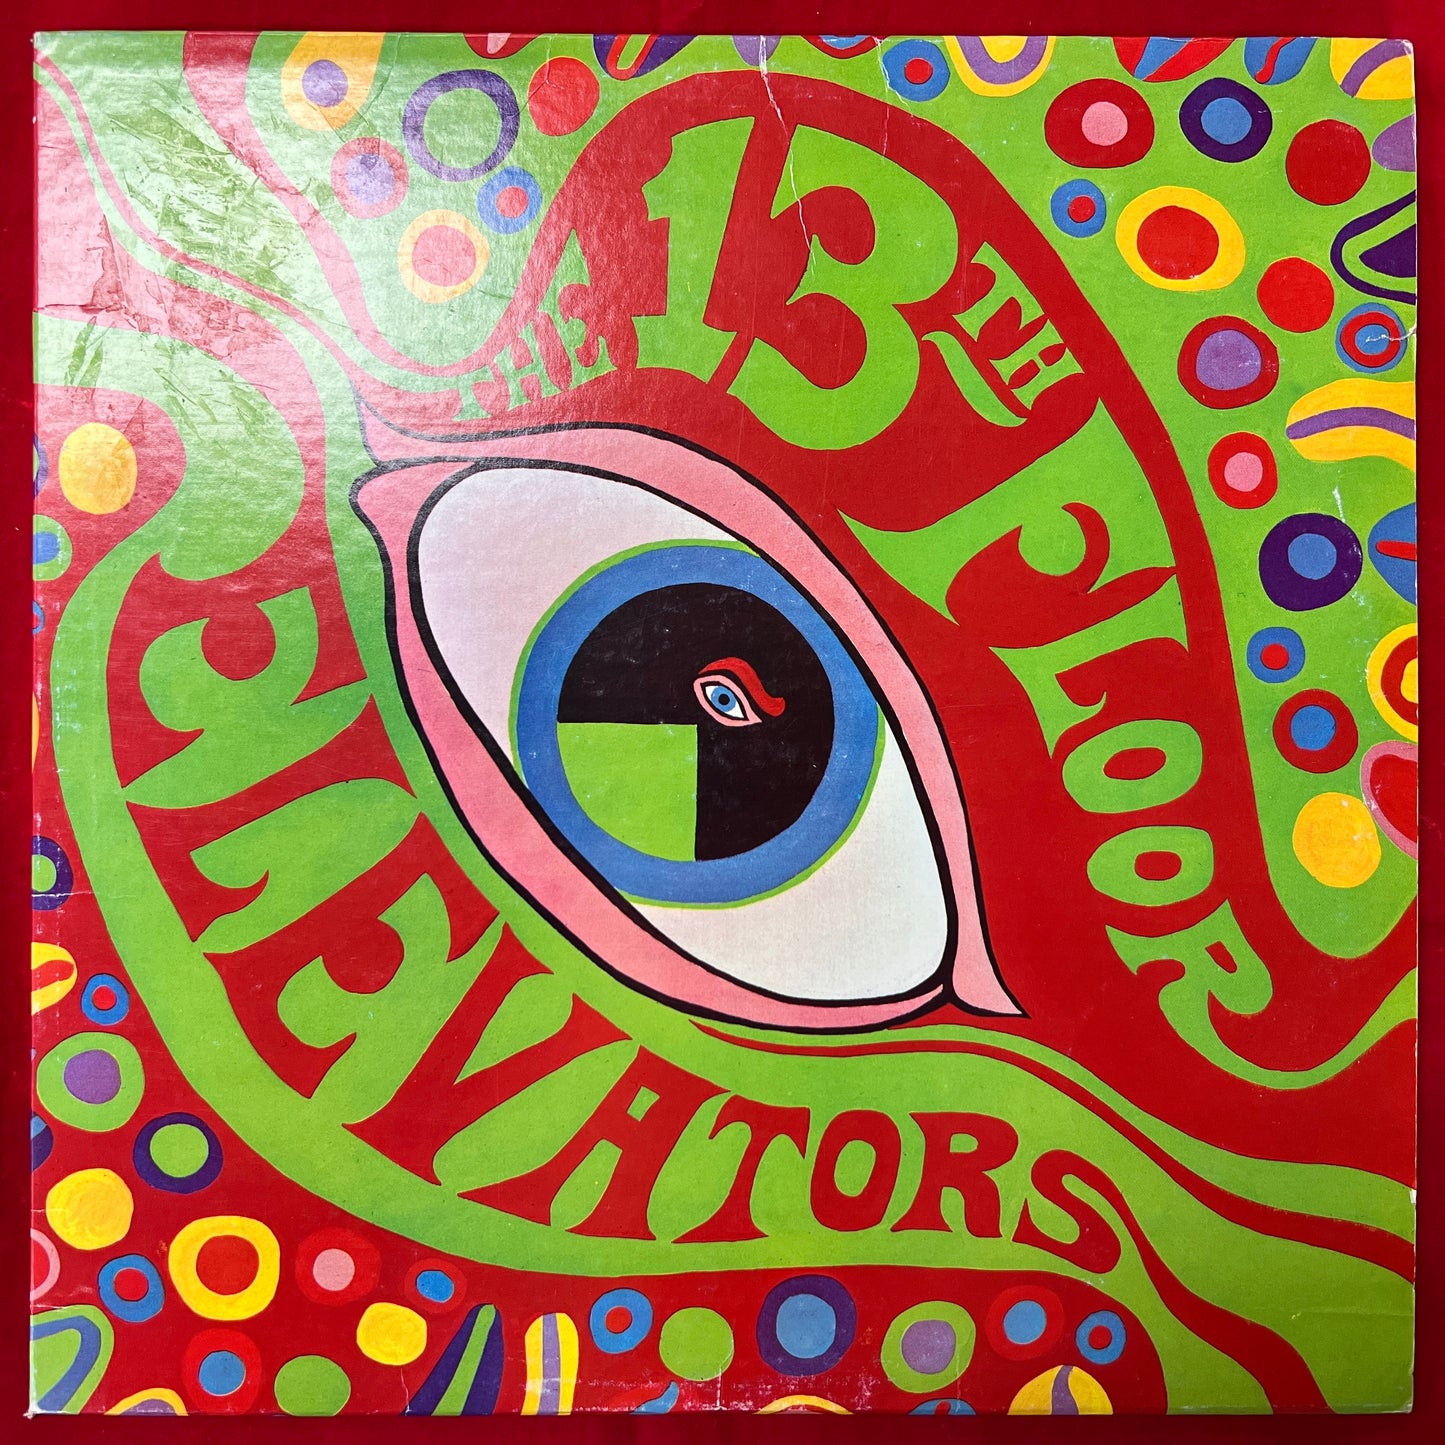 The 13th Floor Elevators - The Psychedelic Sounds Of - Stereo LP